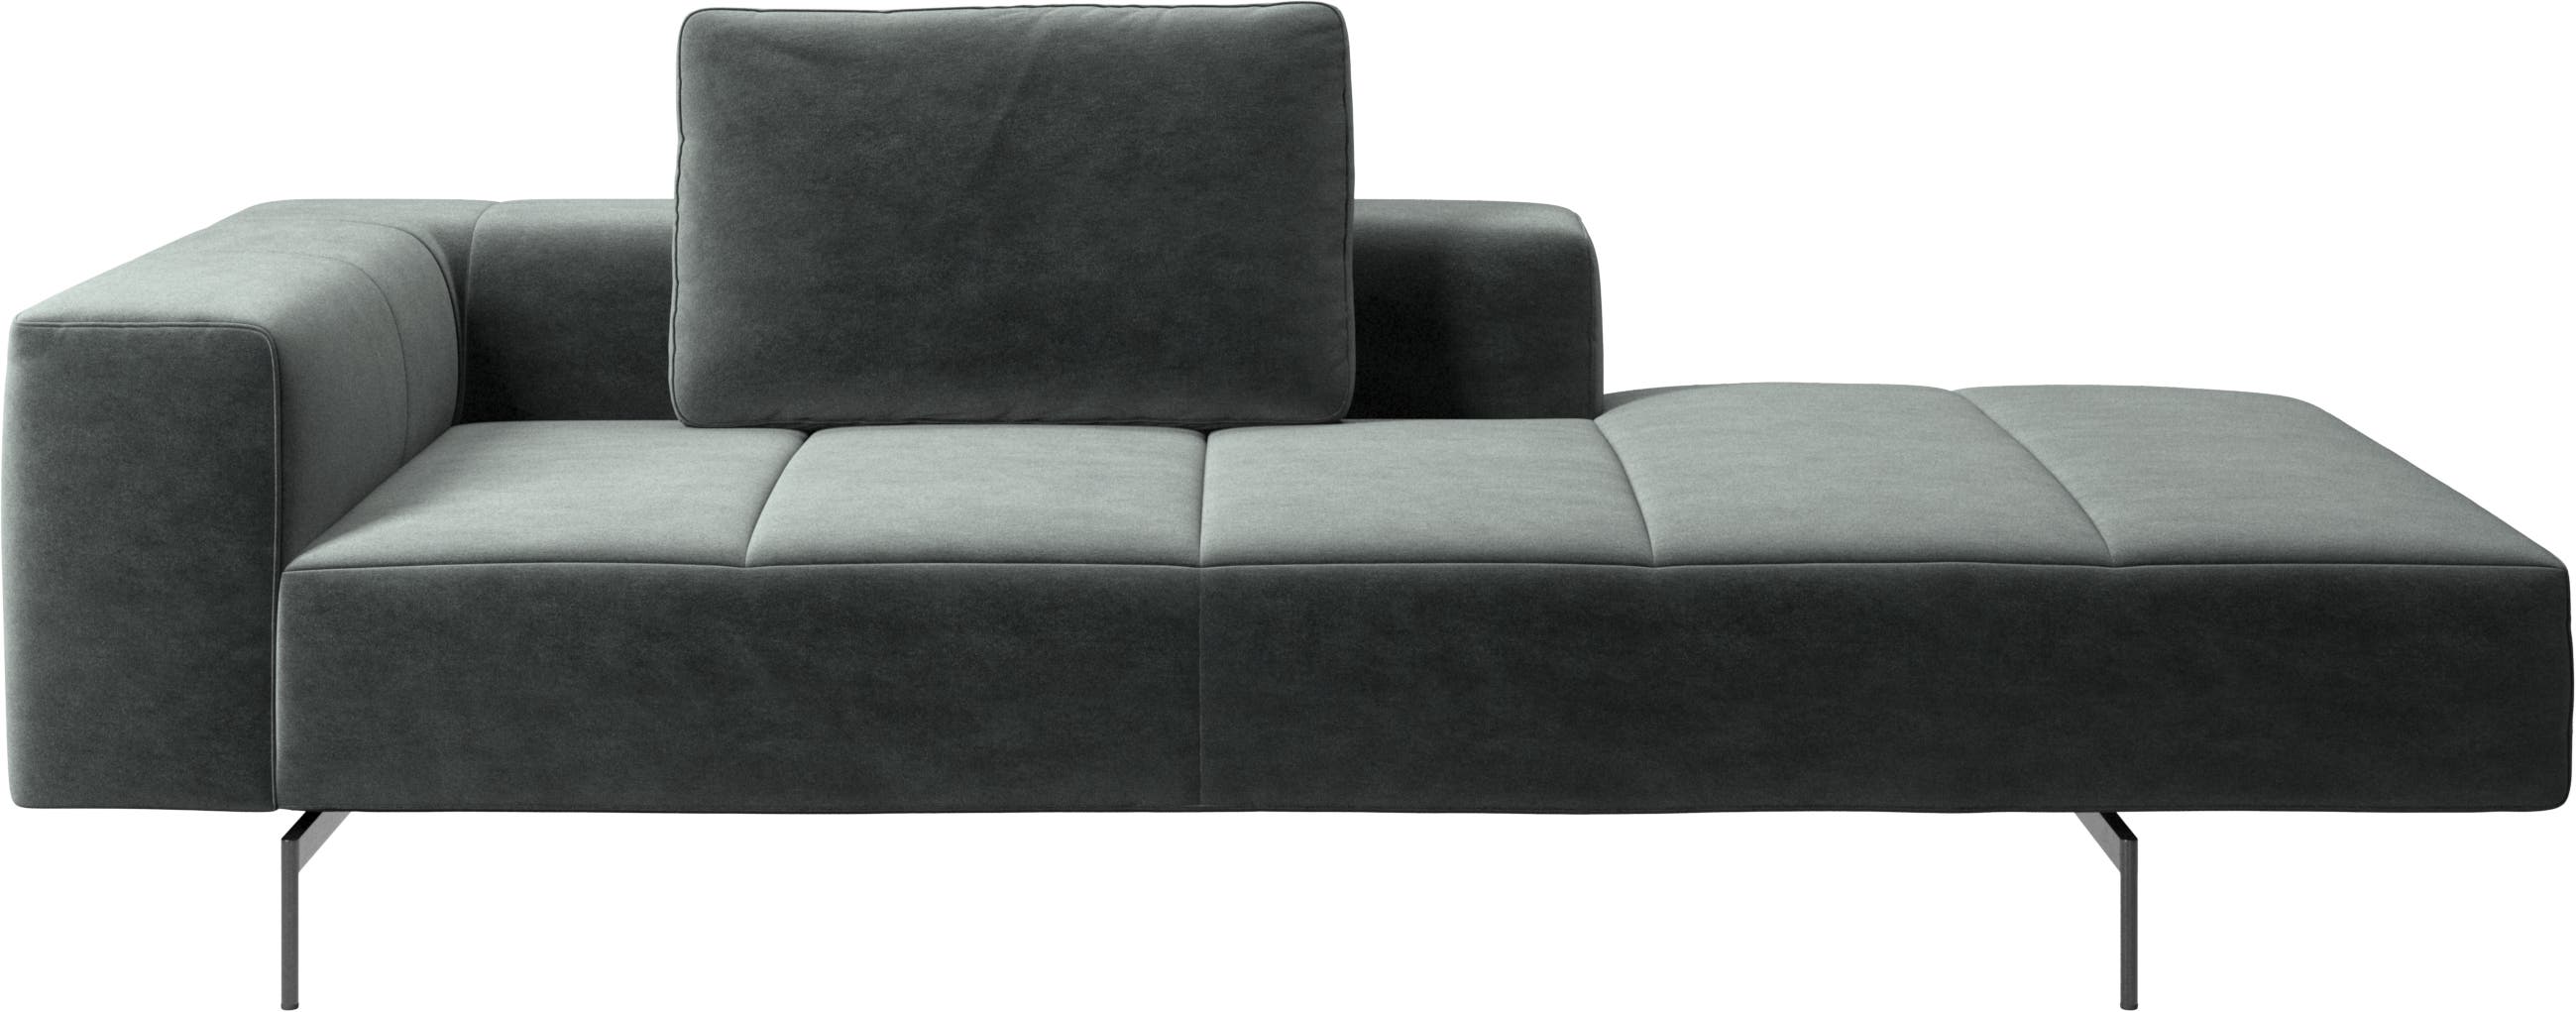 Amsterdam Iounging module for sofa, armrest left, open end right